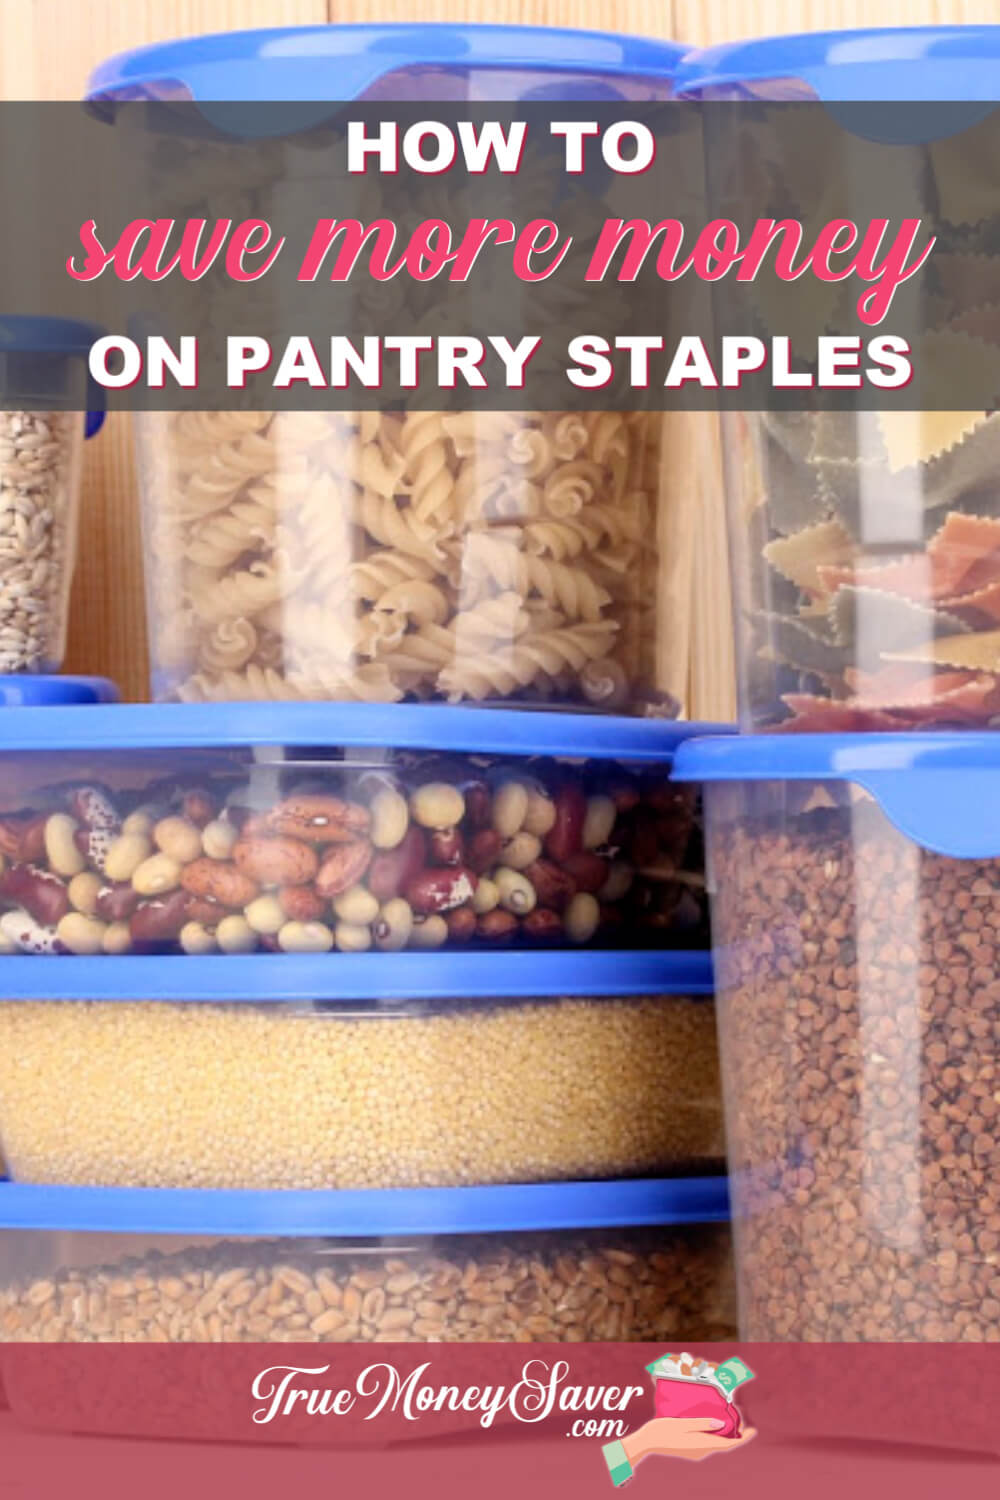 How To Save The Most Money On Pantry Staples